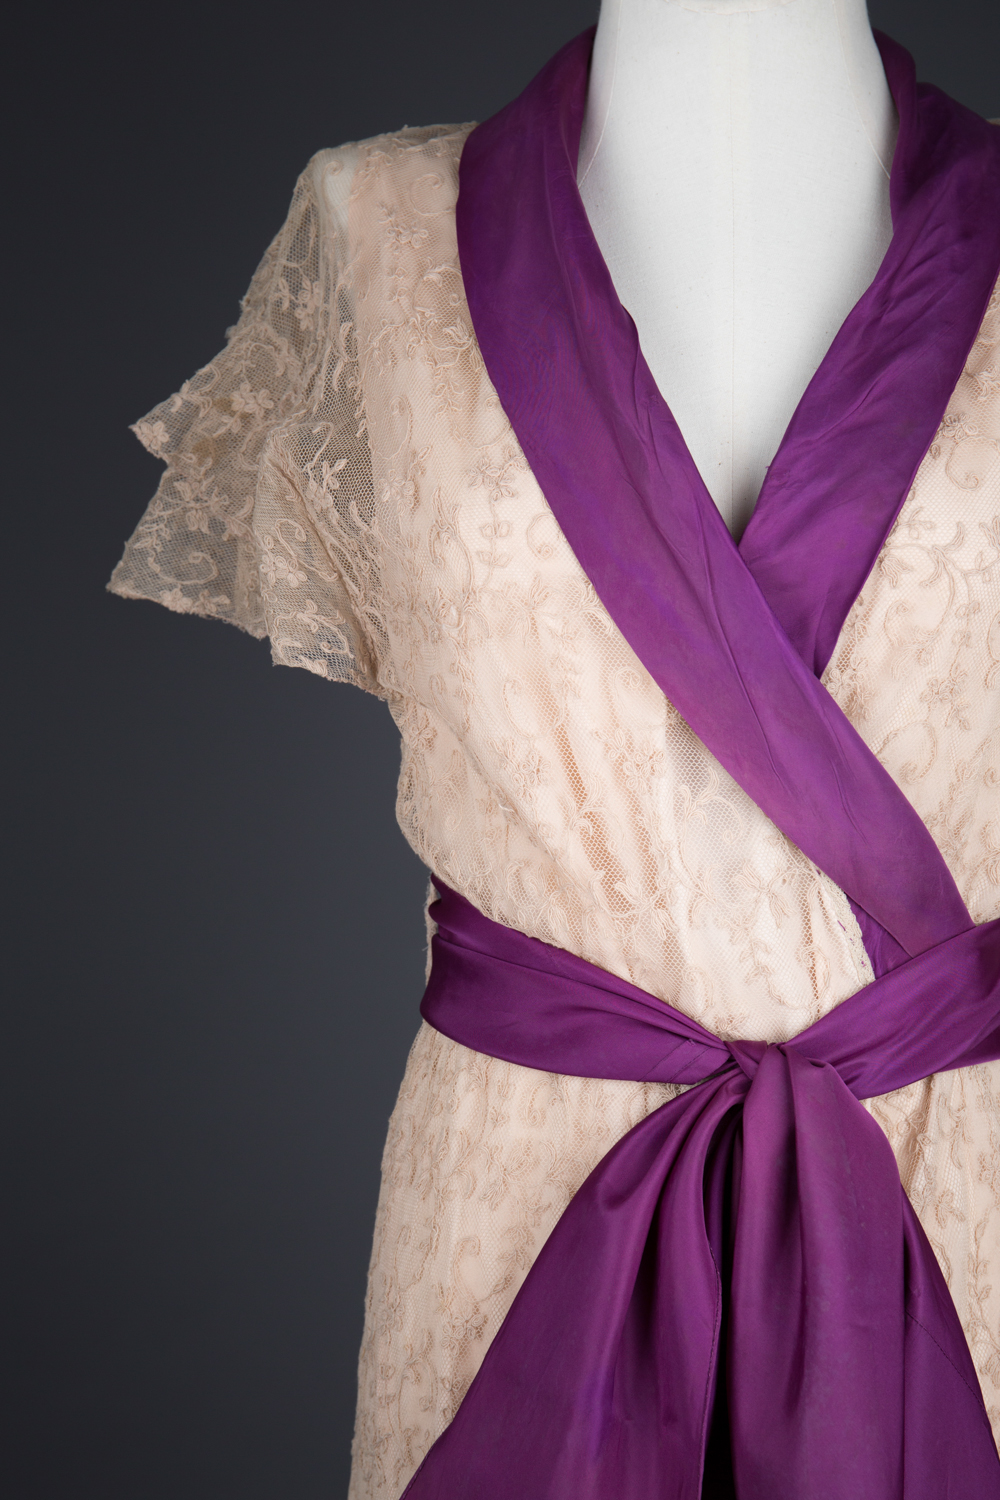 Ecru Embroidered Tulle Wrap Robe With Purple Silk Sash, c. 1920s. The Underpinnings Museum. Photography by Tigz Rice.